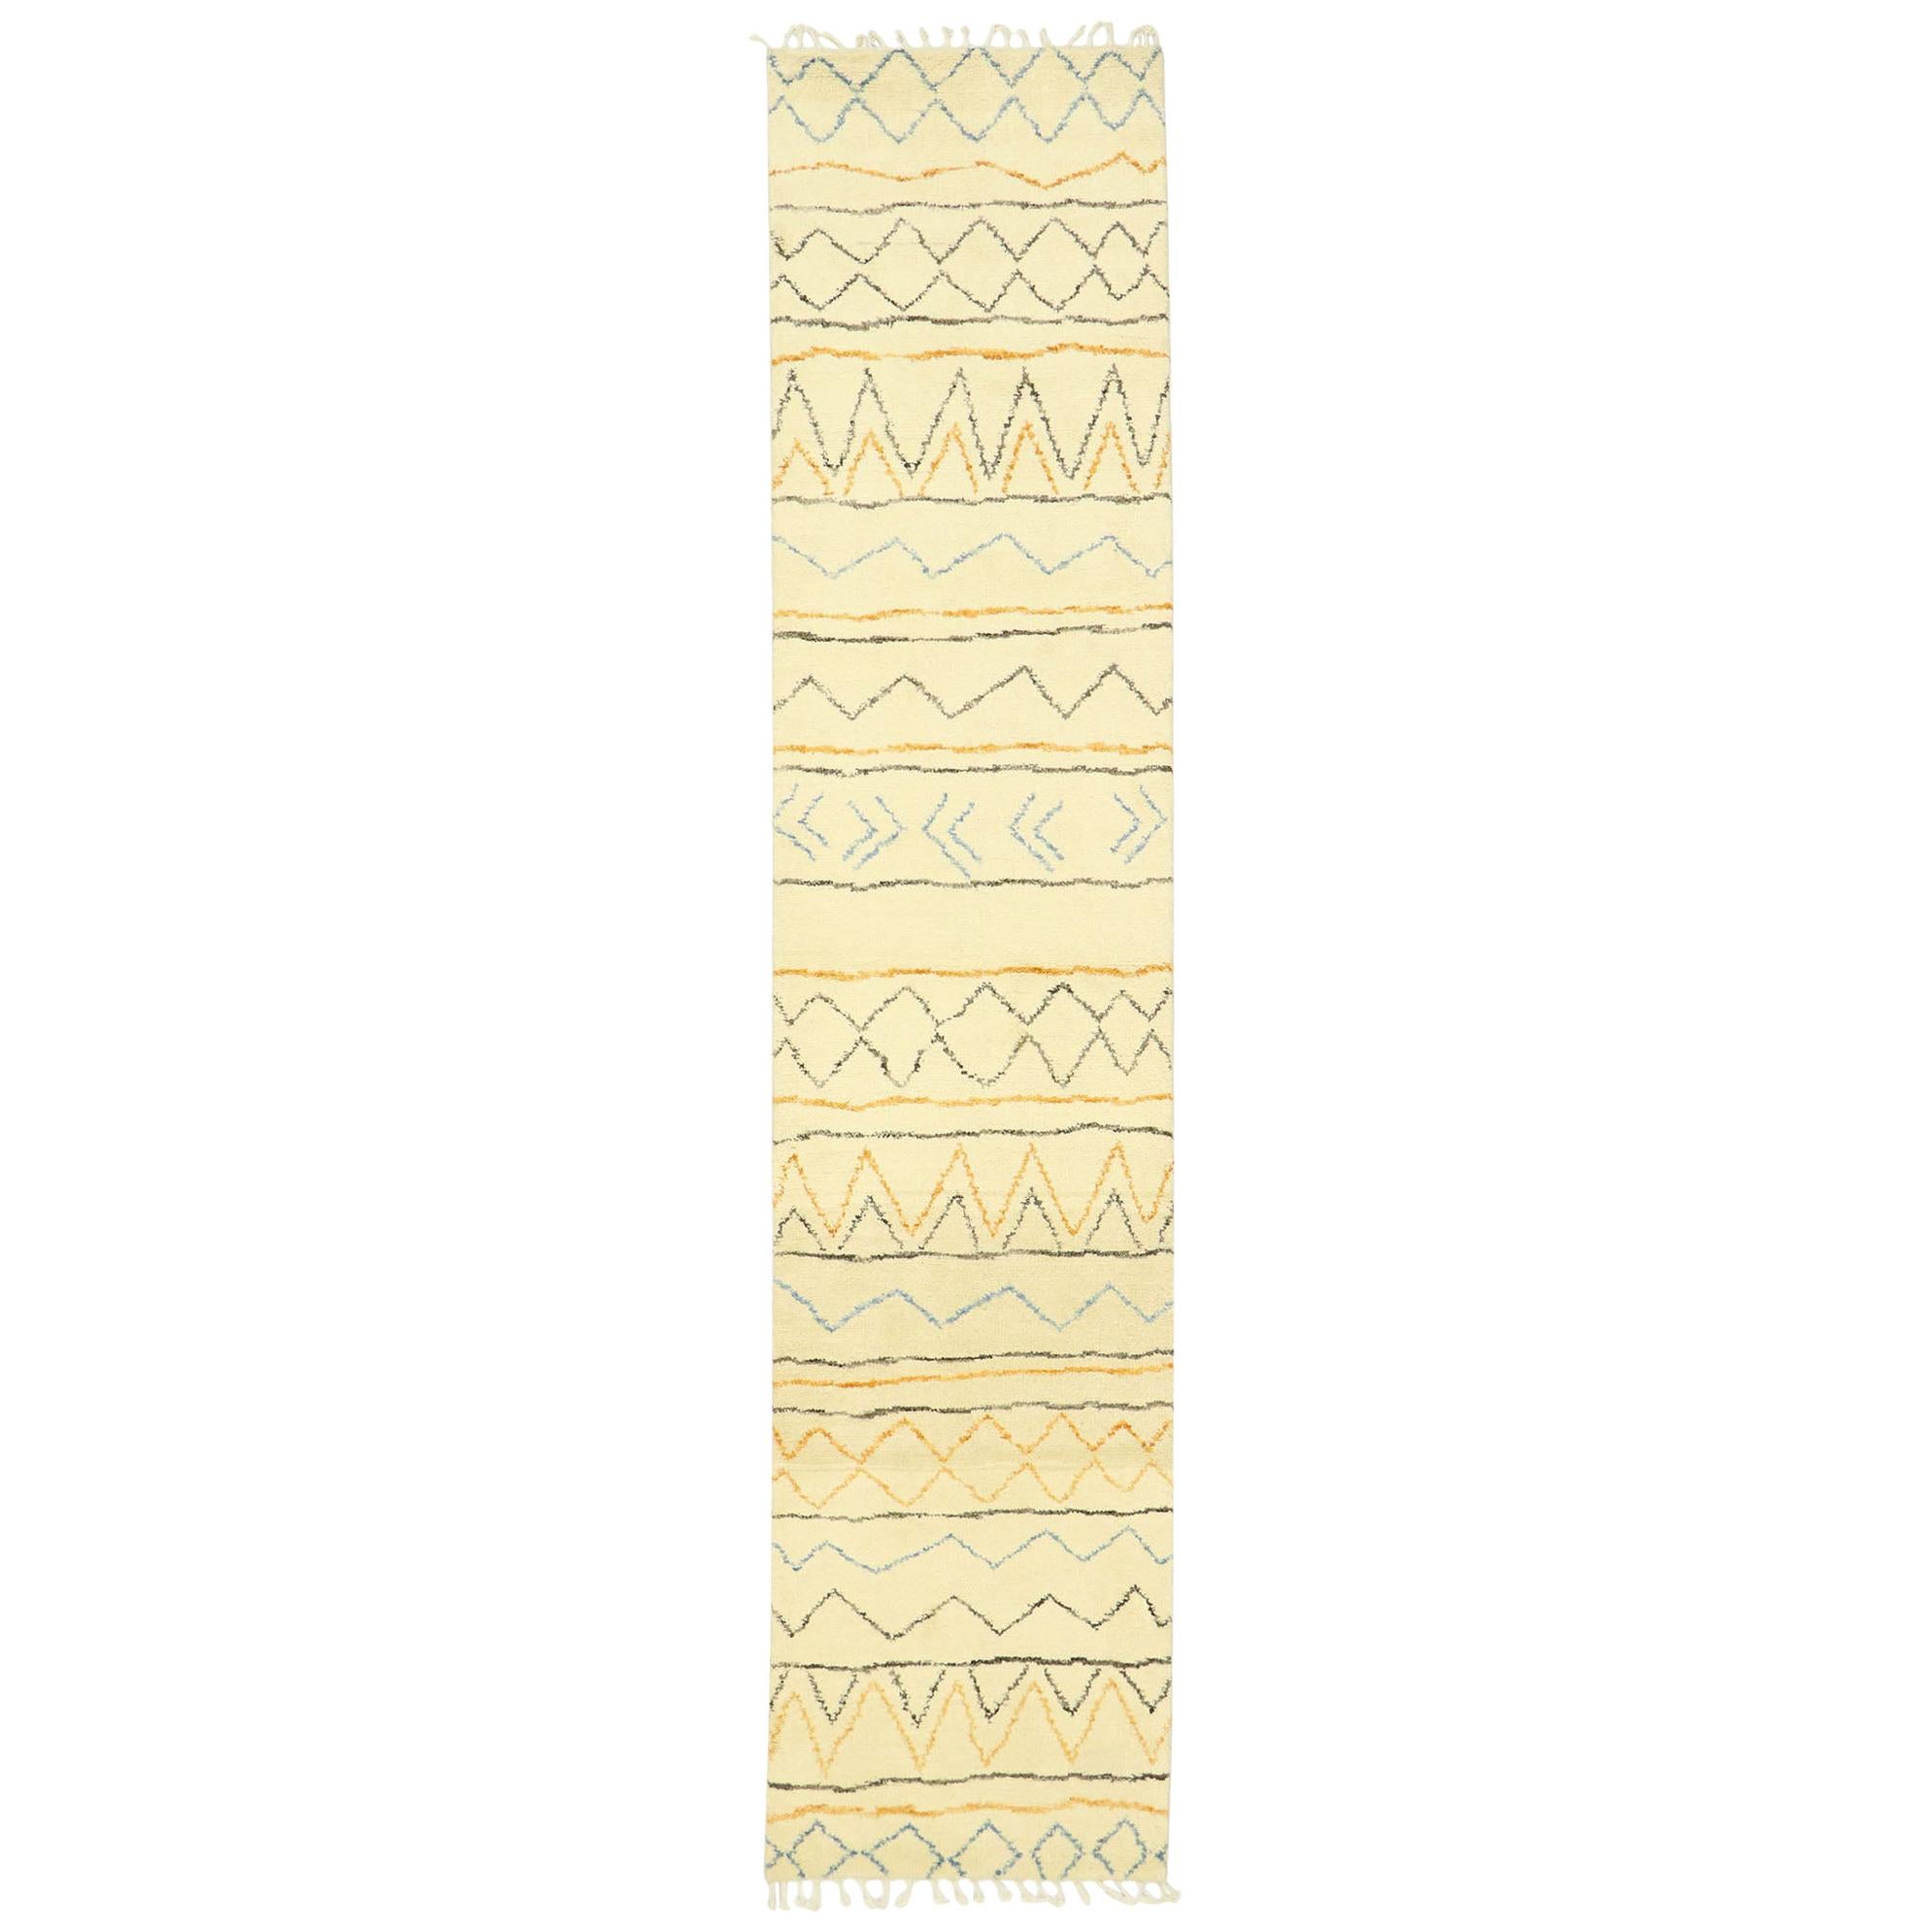 New Contemporary Moroccan Runner with Cozy Boho Chic Tribal Style